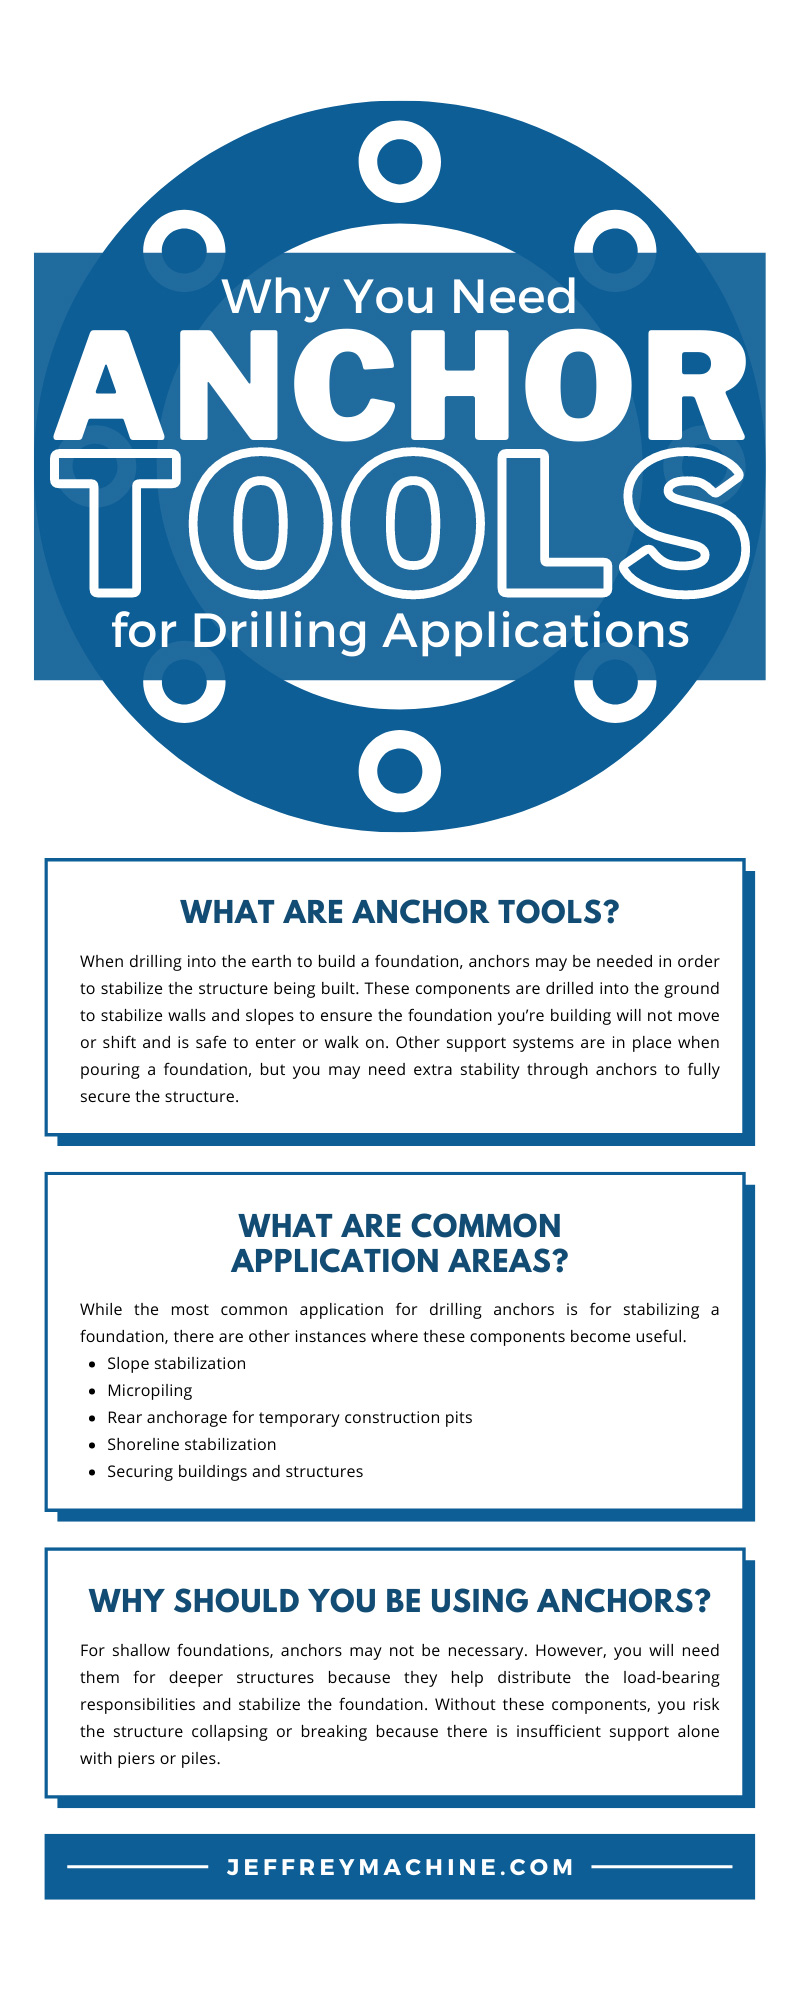 Why You Need Anchor Tools for Drilling Applications